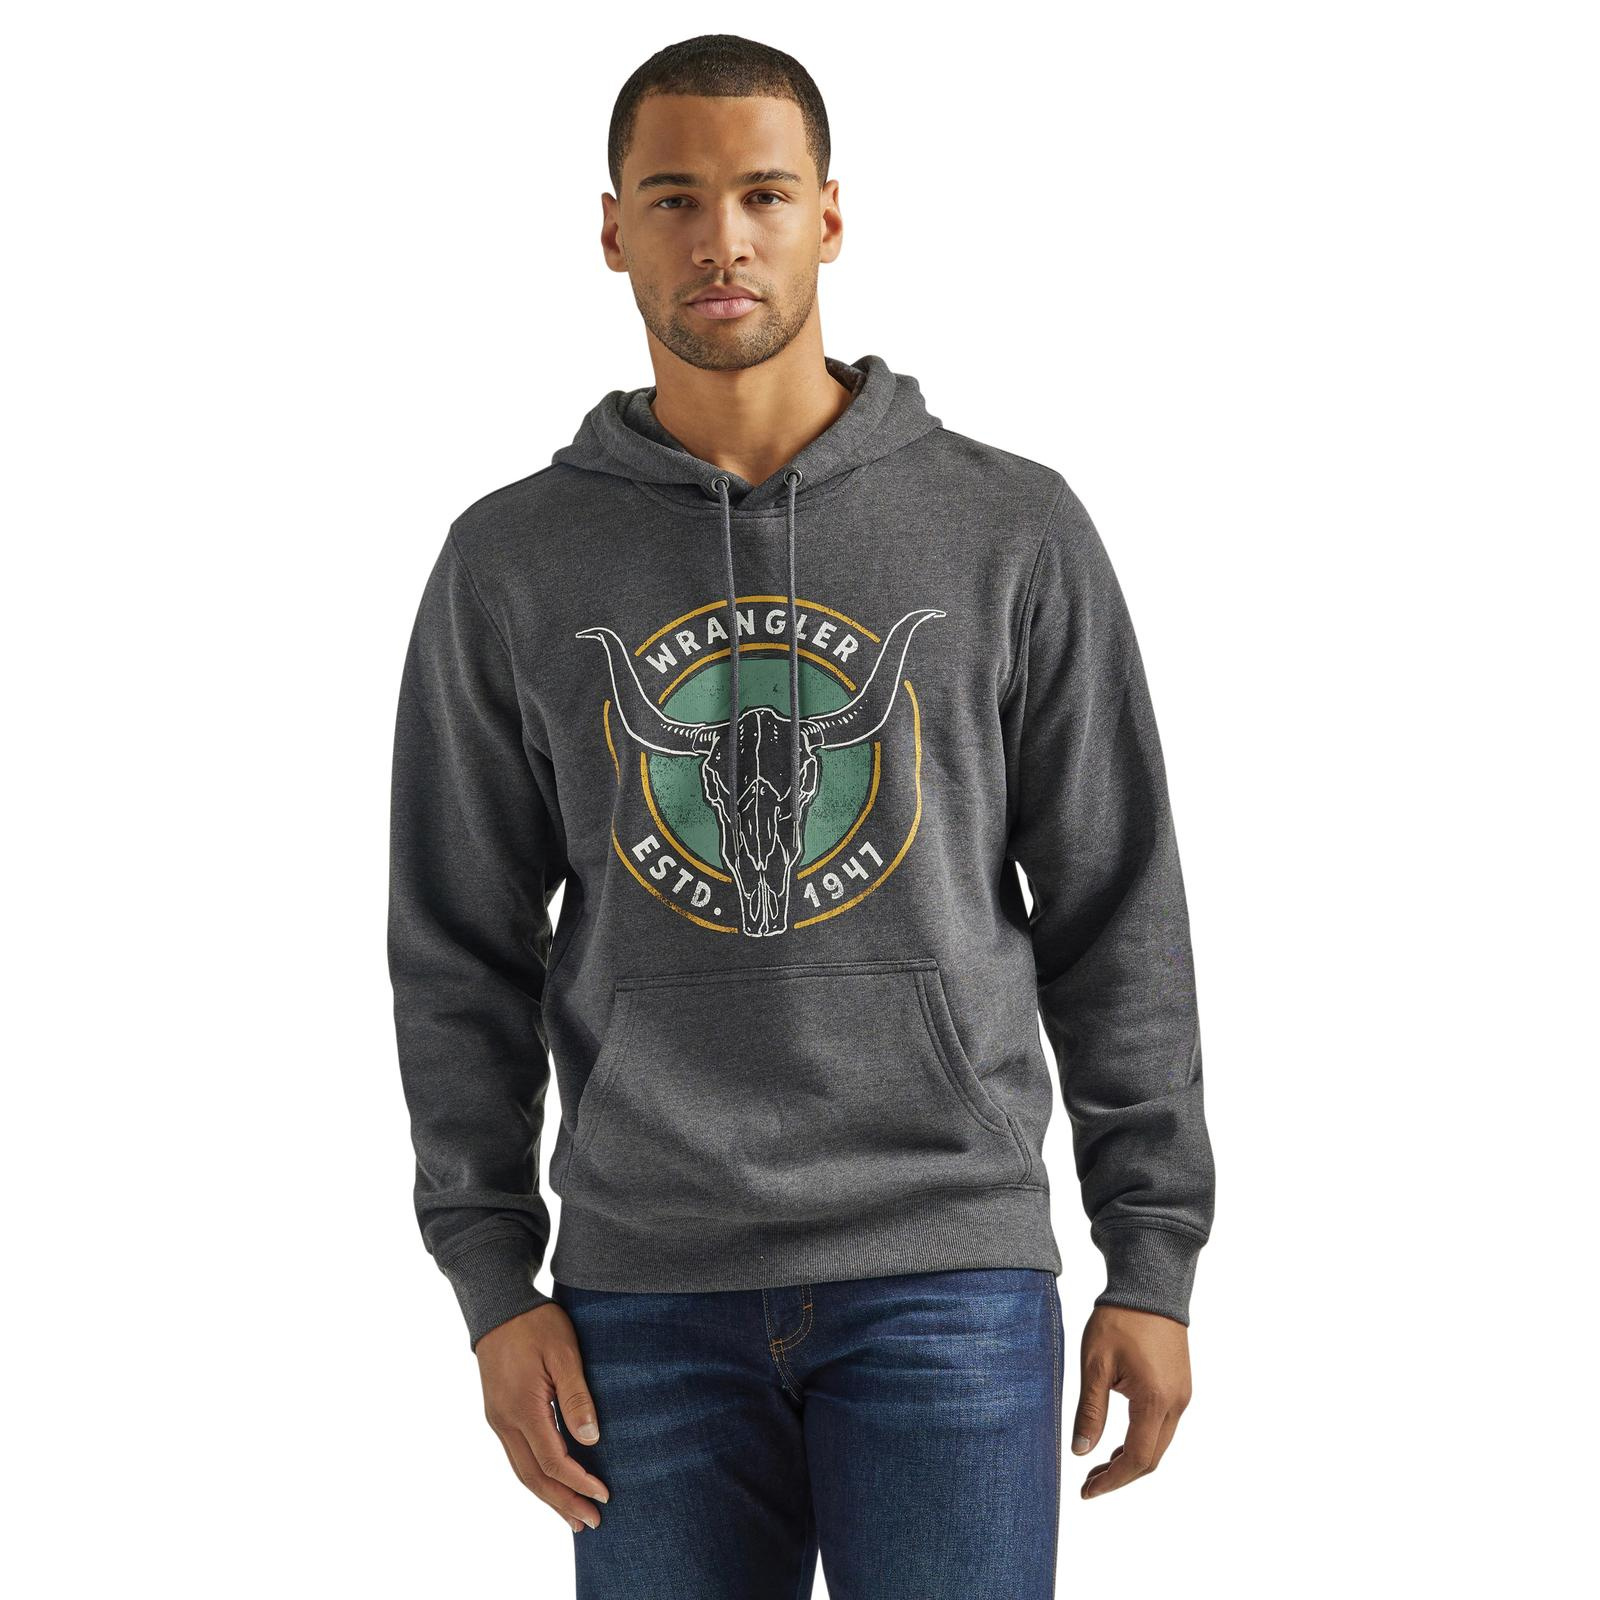 Mens Graphic Hoodie Black 112339641 - Diamond T Outfitters